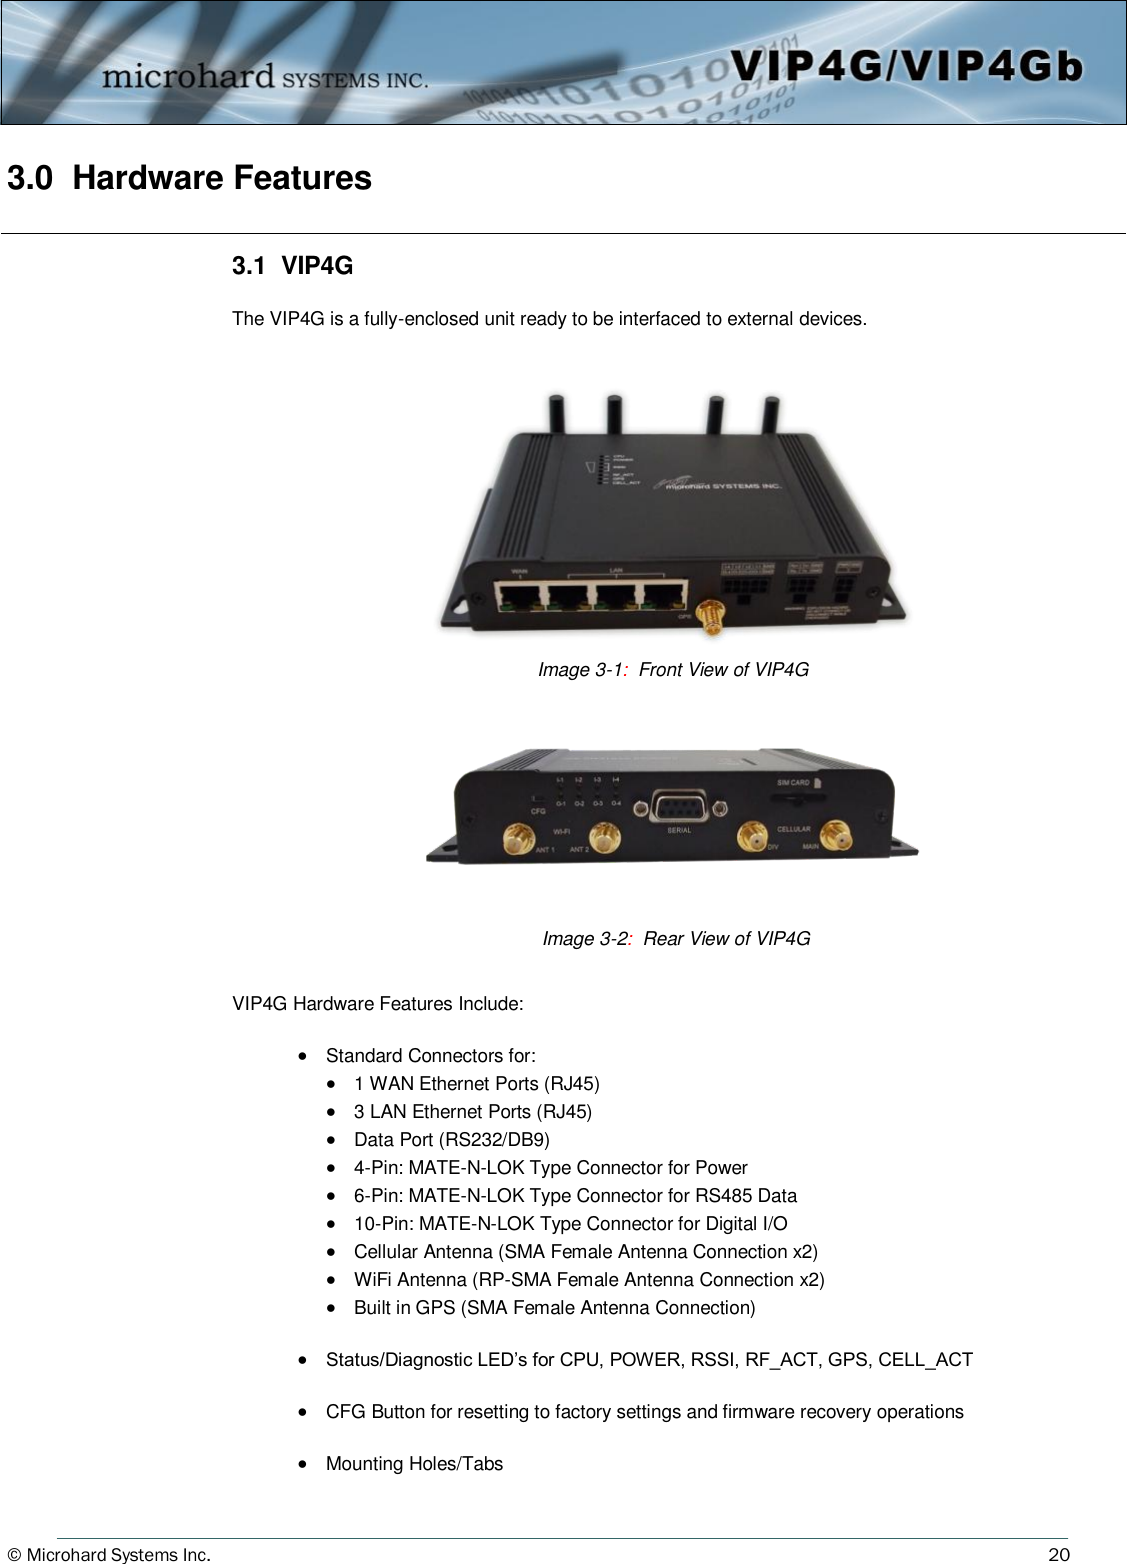 © Microhard Systems Inc.     20 3.0  Hardware Features    3.1  VIP4G  The VIP4G is a fully-enclosed unit ready to be interfaced to external devices.                          VIP4G Hardware Features Include:    Standard Connectors for:   1 WAN Ethernet Ports (RJ45)   3 LAN Ethernet Ports (RJ45)   Data Port (RS232/DB9)   4-Pin: MATE-N-LOK Type Connector for Power   6-Pin: MATE-N-LOK Type Connector for RS485 Data   10-Pin: MATE-N-LOK Type Connector for Digital I/O   Cellular Antenna (SMA Female Antenna Connection x2)   WiFi Antenna (RP-SMA Female Antenna Connection x2)   Built in GPS (SMA Female Antenna Connection)    Status/Diagnostic LED’s for CPU, POWER, RSSI, RF_ACT, GPS, CELL_ACT     CFG Button for resetting to factory settings and firmware recovery operations    Mounting Holes/Tabs Image 3-1:  Front View of VIP4G  Image 3-2:  Rear View of VIP4G  